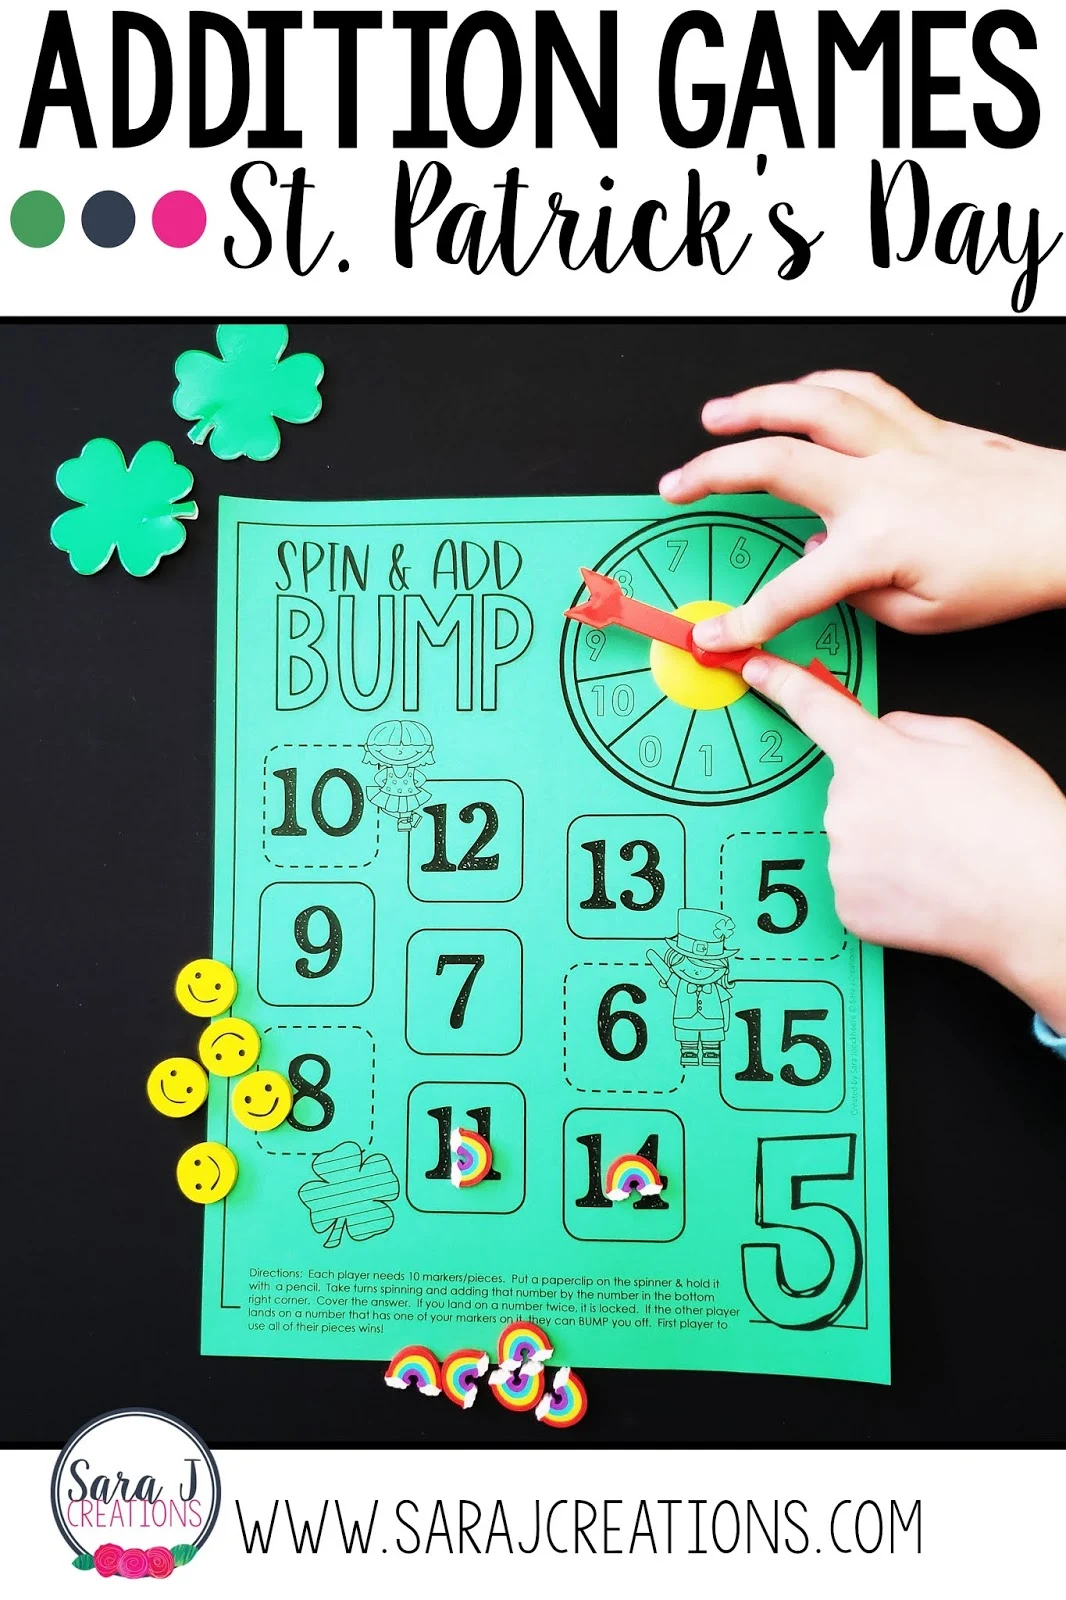 Practice addition facts with these fun St. Patrick's Day math games for kids. Perfect for kindergarten, first grade or second grade as students work on fact fluency.